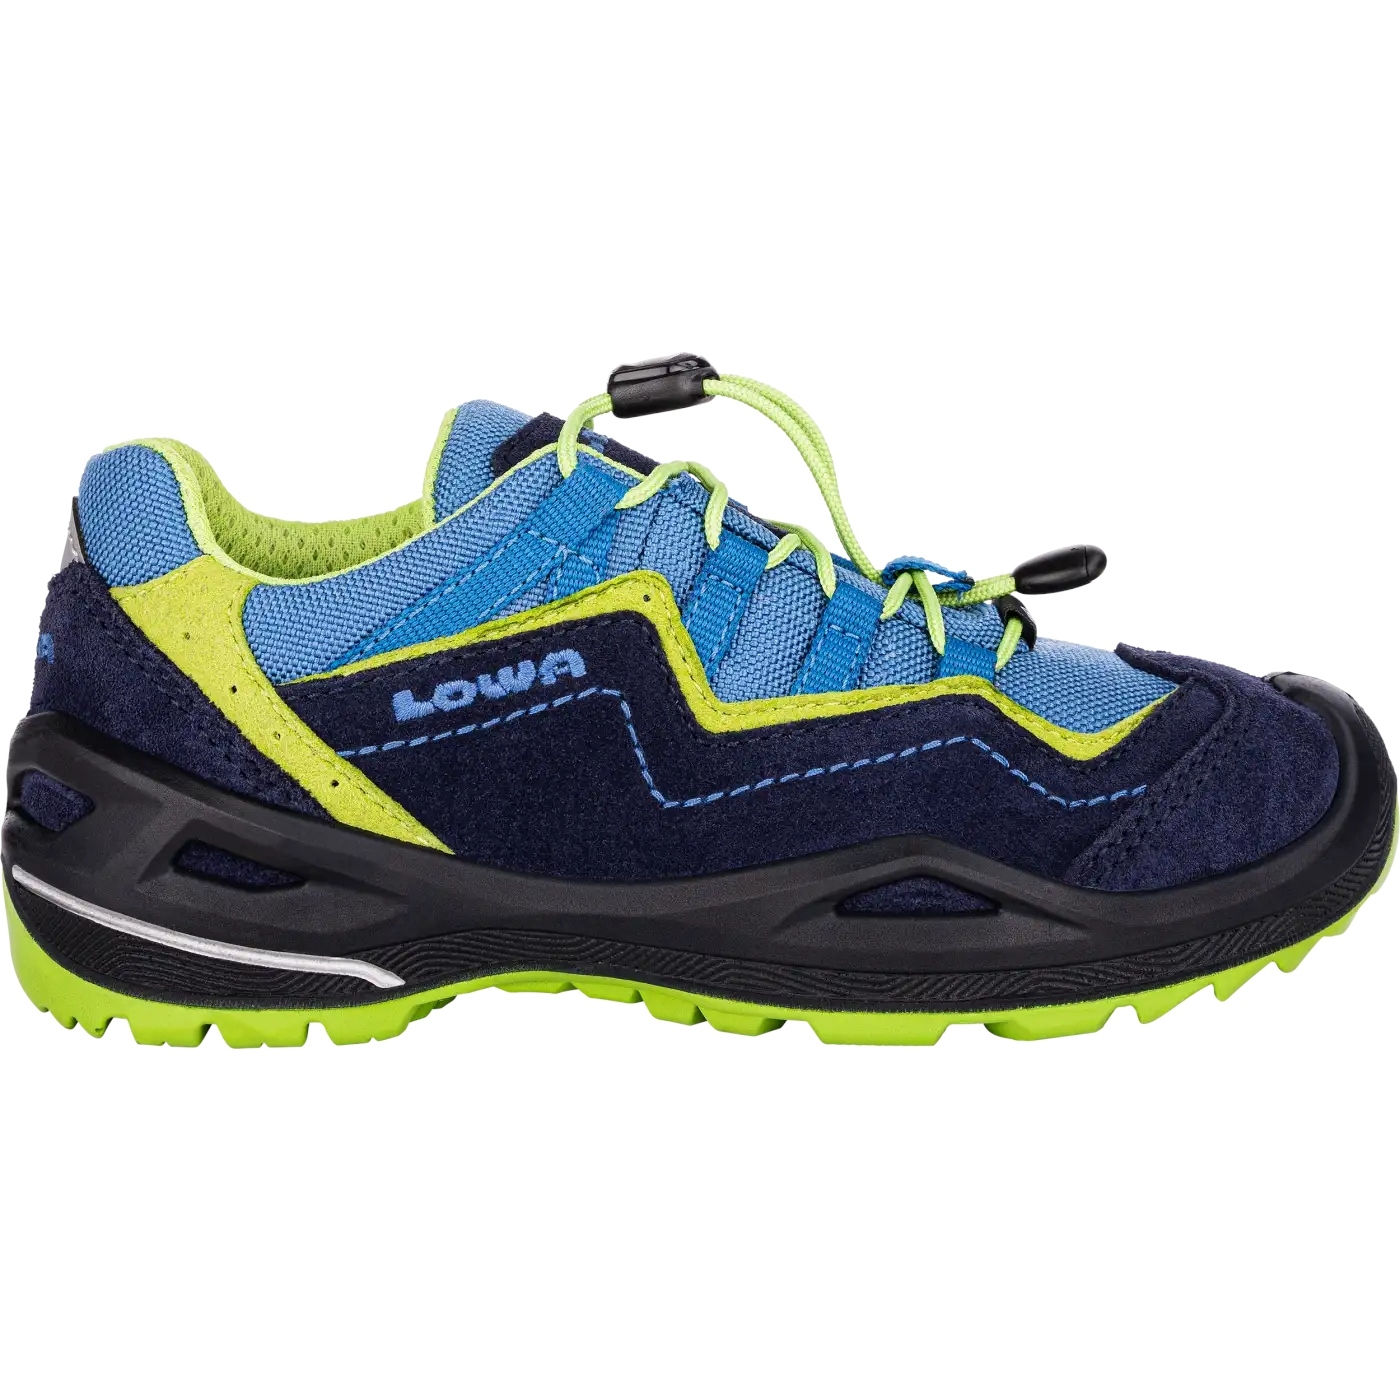 Picture of LOWA Robin Evo GTX Lo Kids Shoes - navy/lime (Size 27-35)